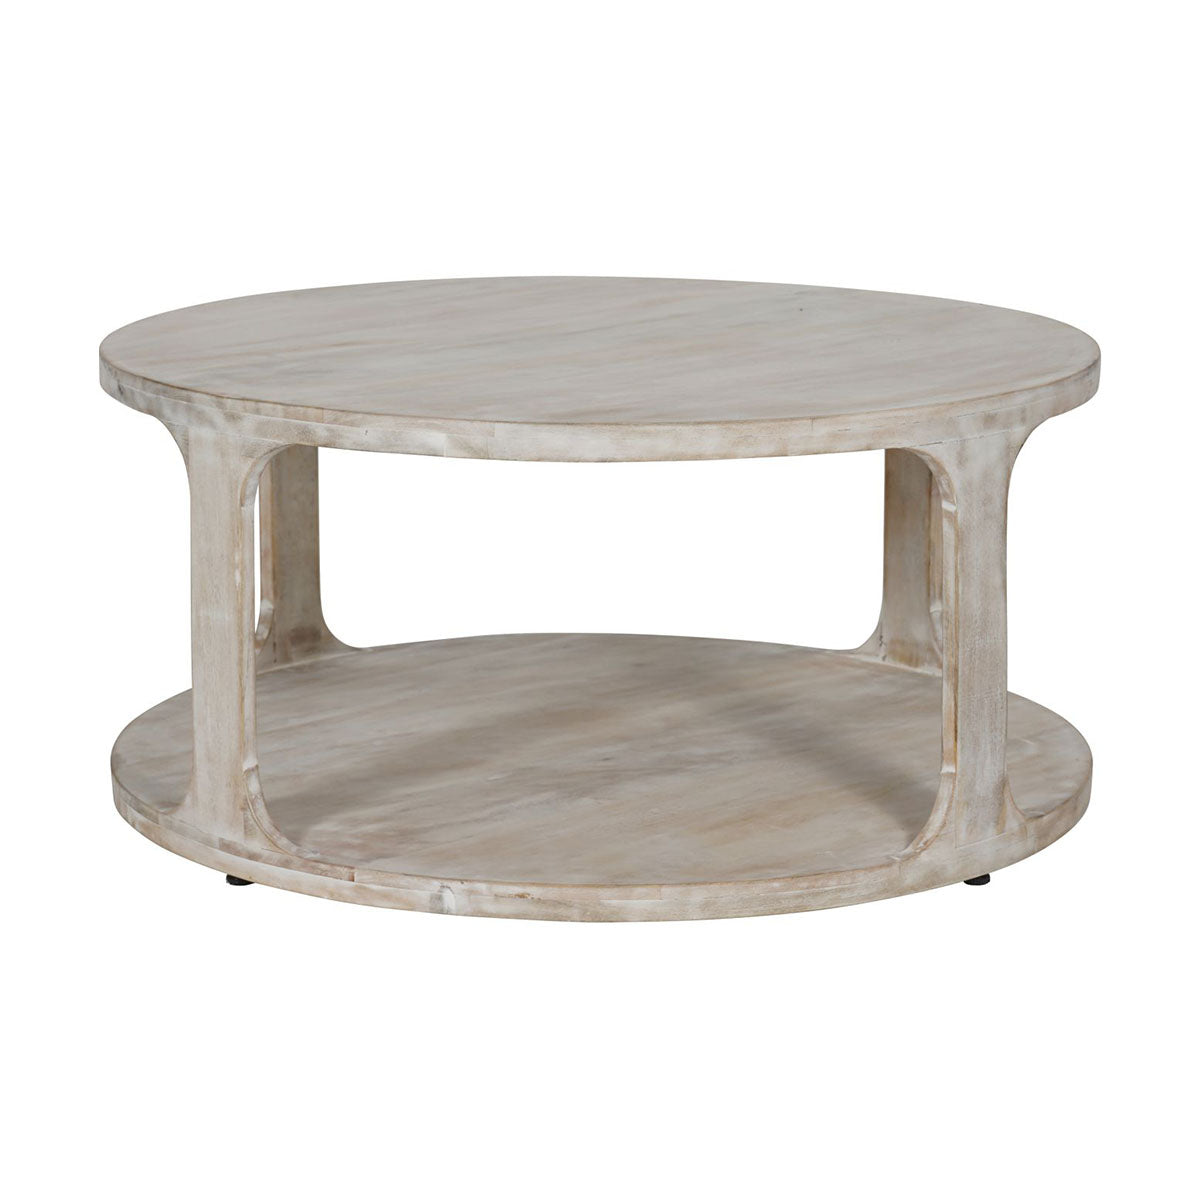 Beadnell Solid Carved Wooden Coffee Table in Whitewash Finish